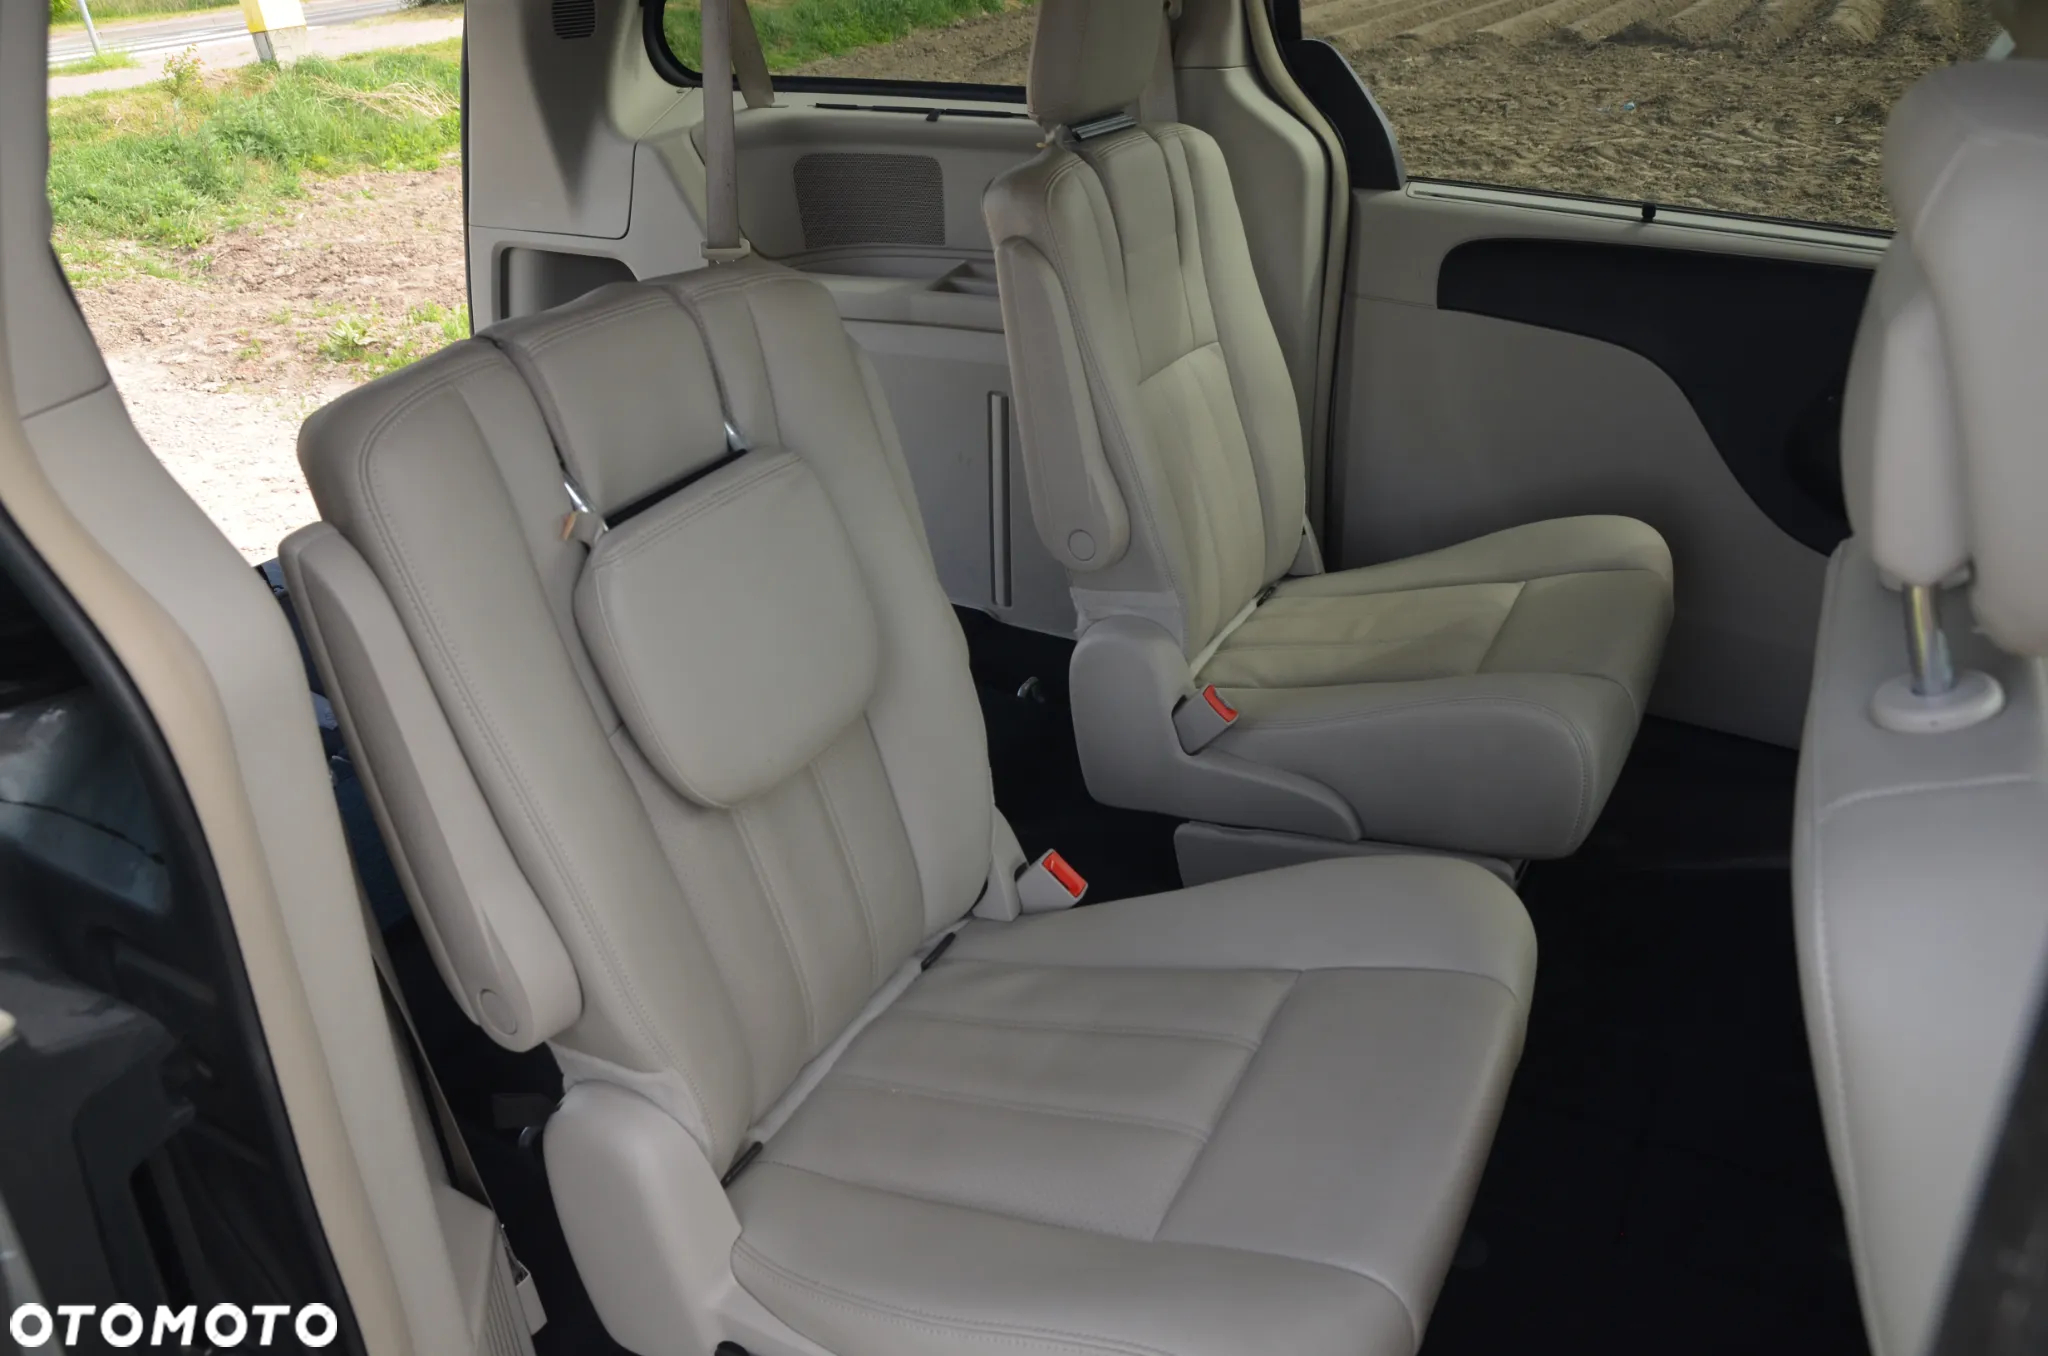 Chrysler Town & Country - 15